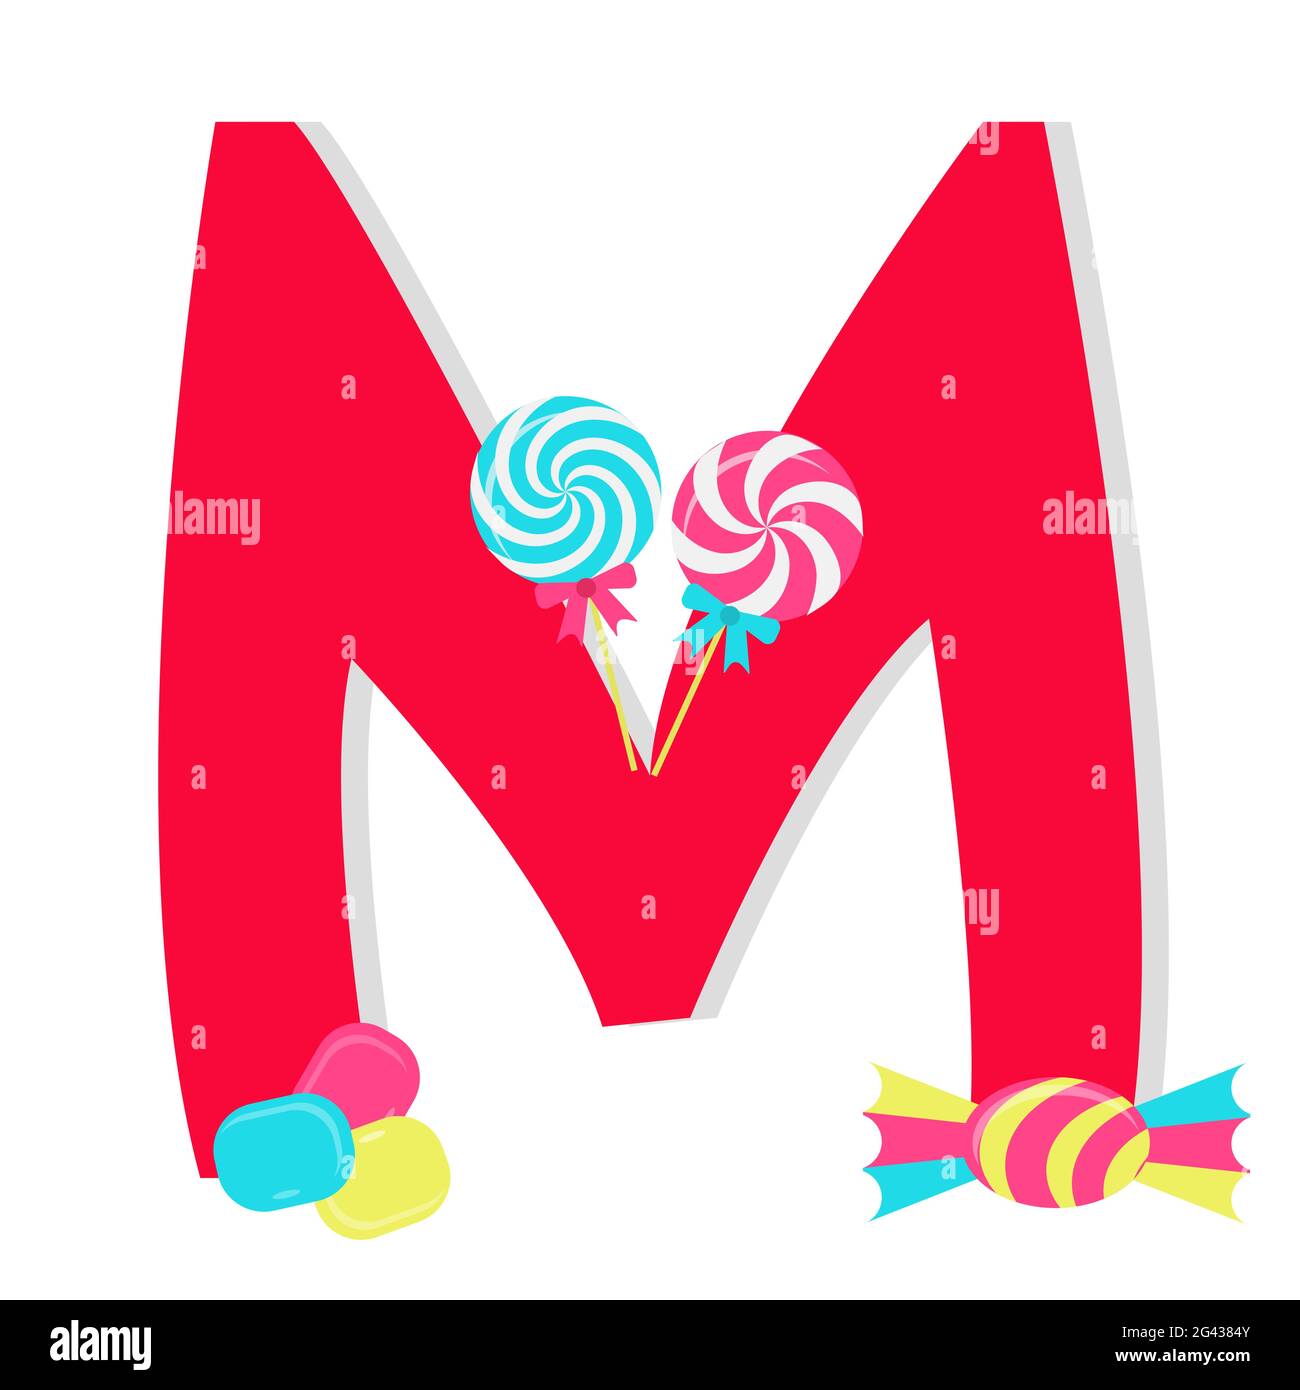 Letter 'm' from stylized alphabet with candies: lollipop, tablets candy, Candy wrapped. White background. Stock Vector